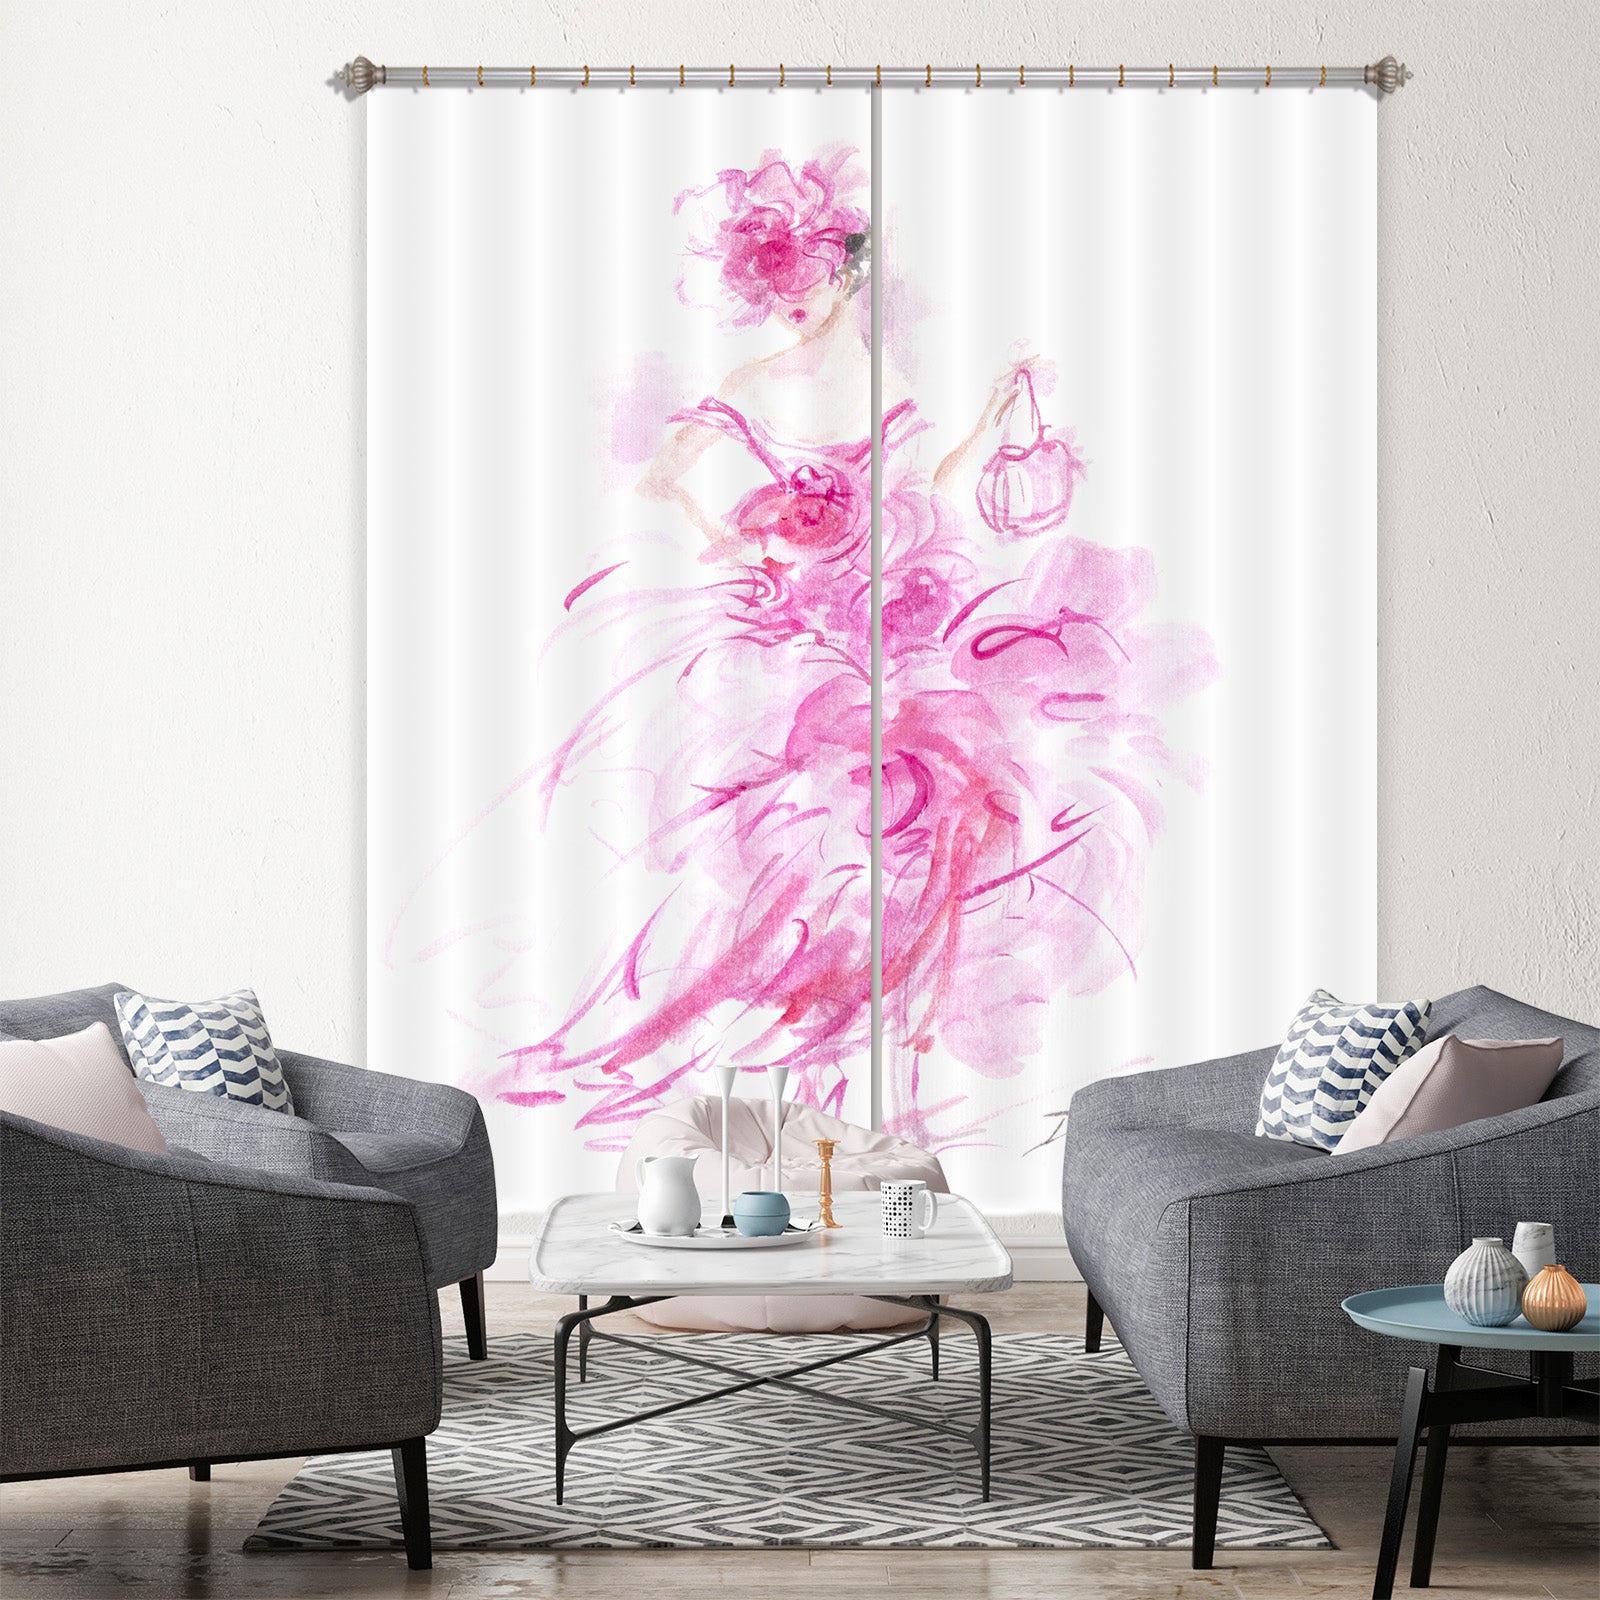 3D Pink Dress 1019 Debi Coules Curtain Curtains Drapes